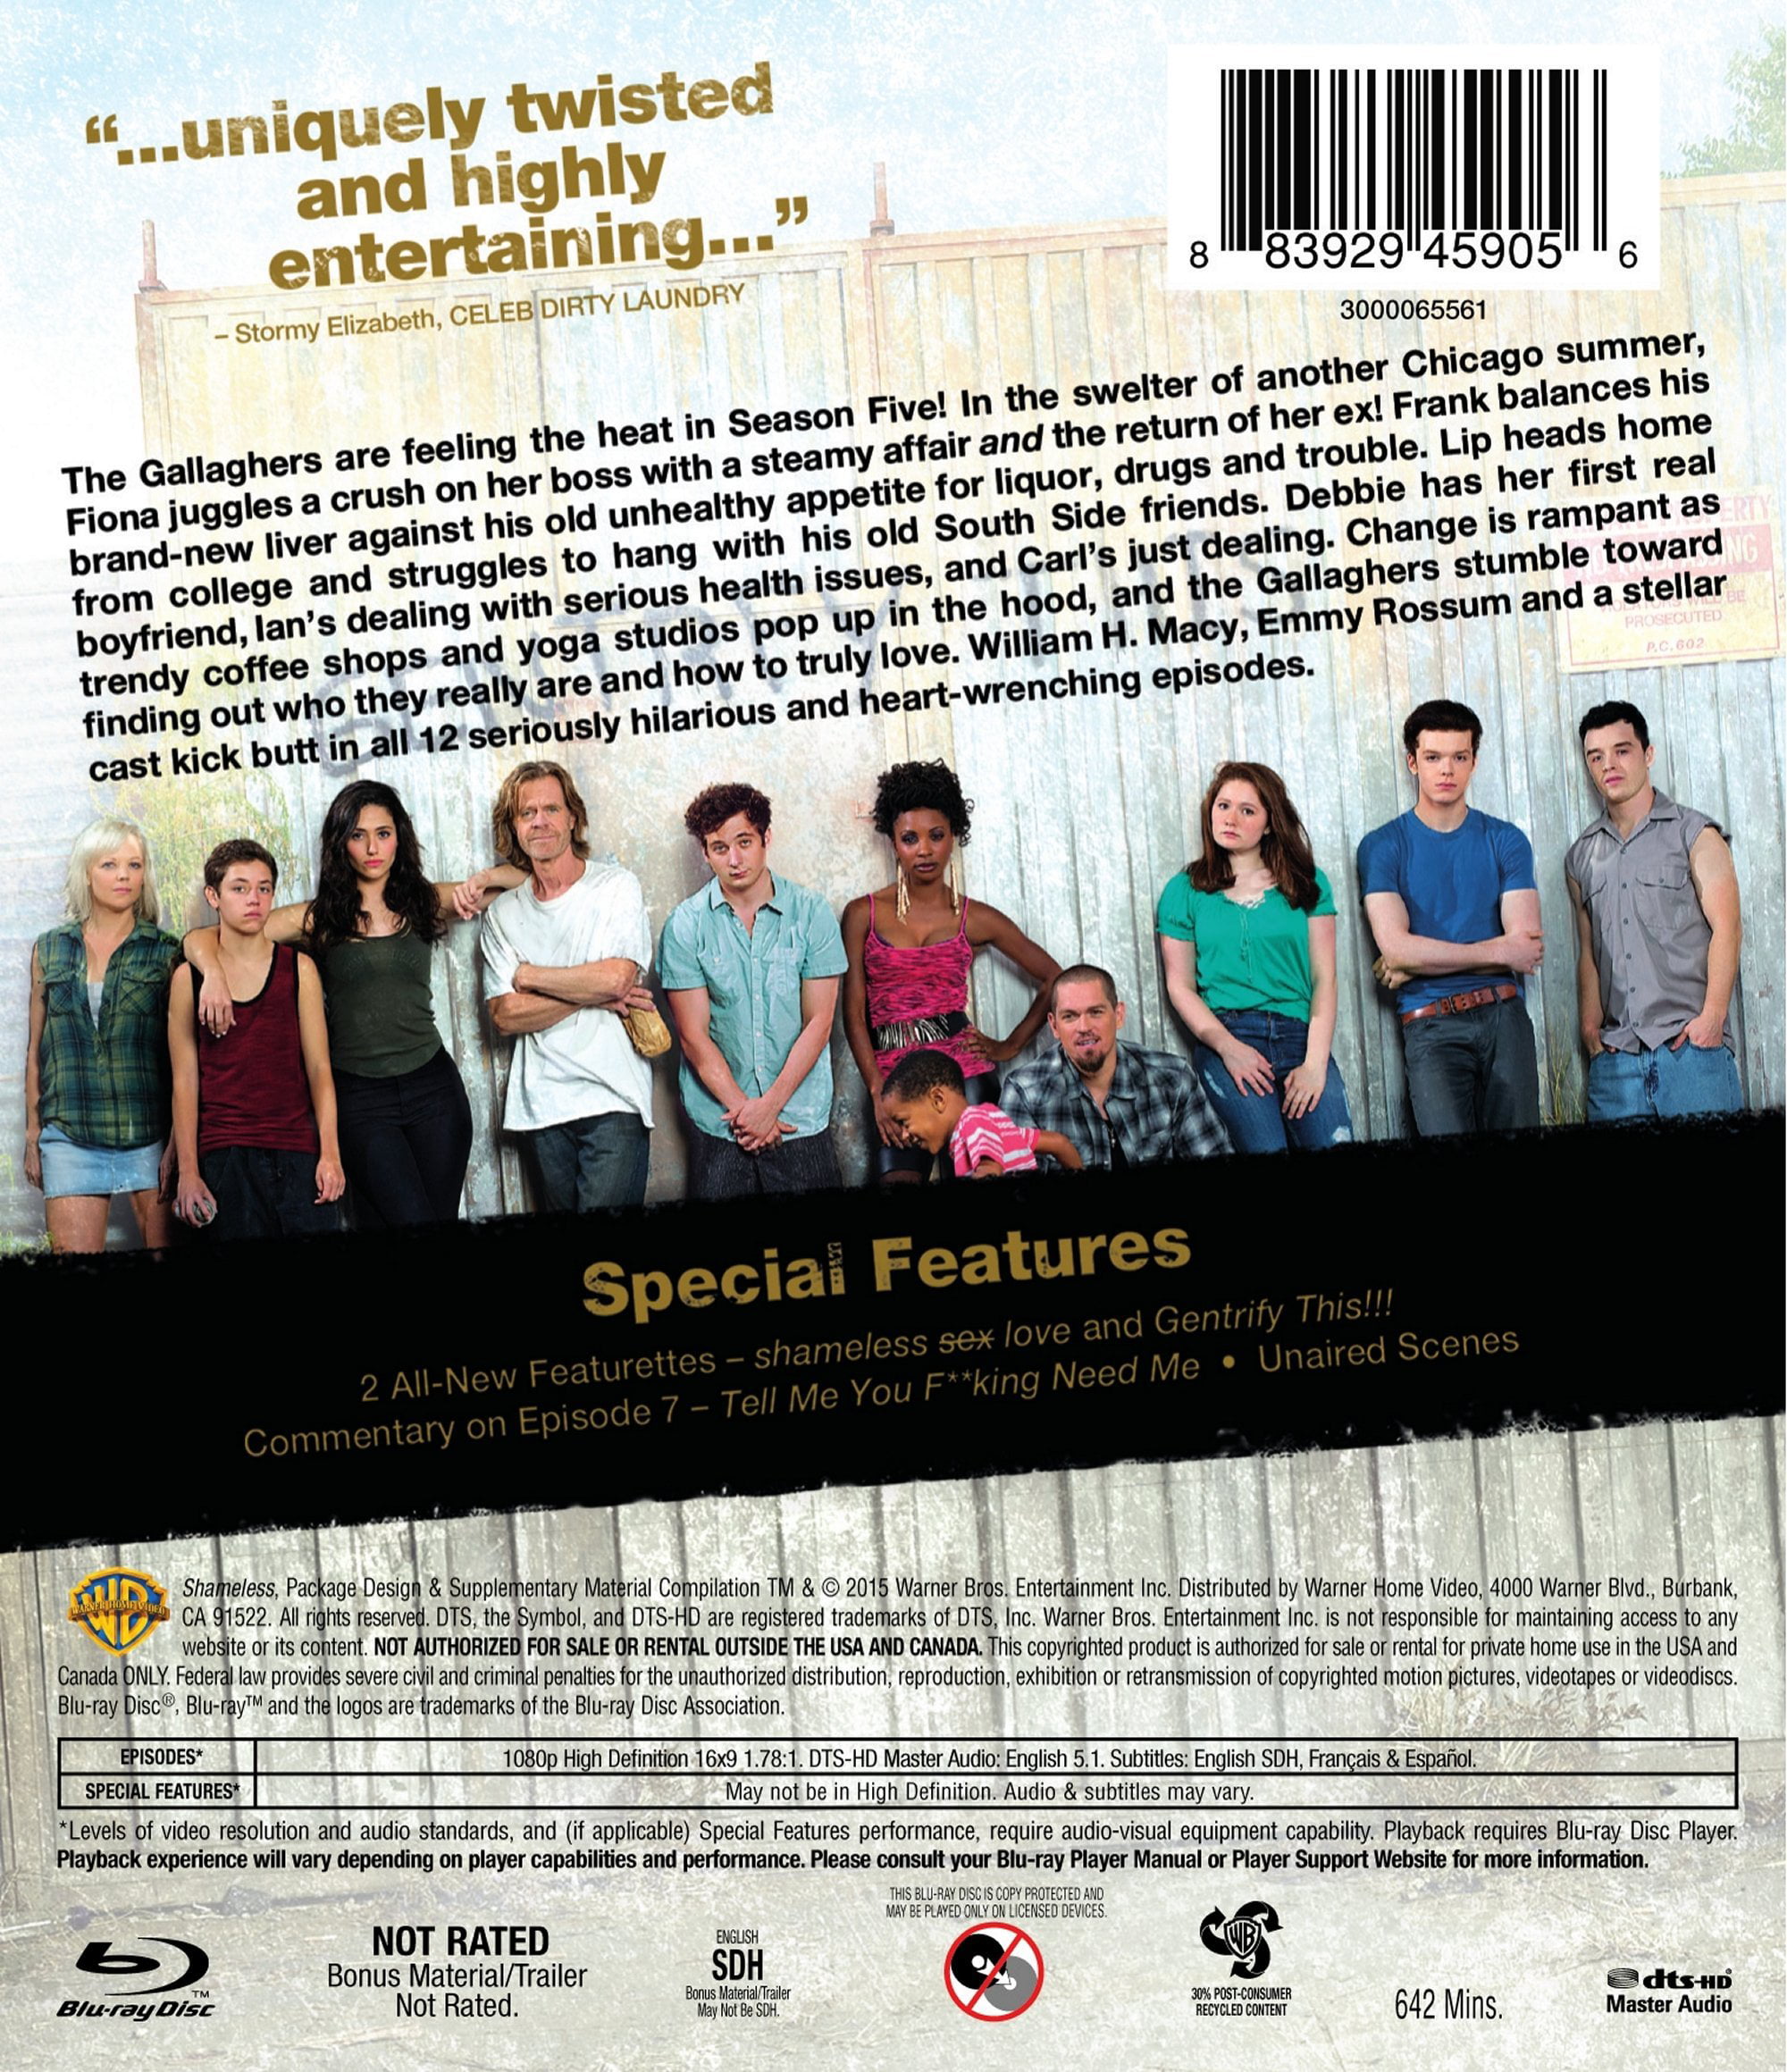 Warner Home Video Shameless The Complete Fifth Season (Blu-ray) pic